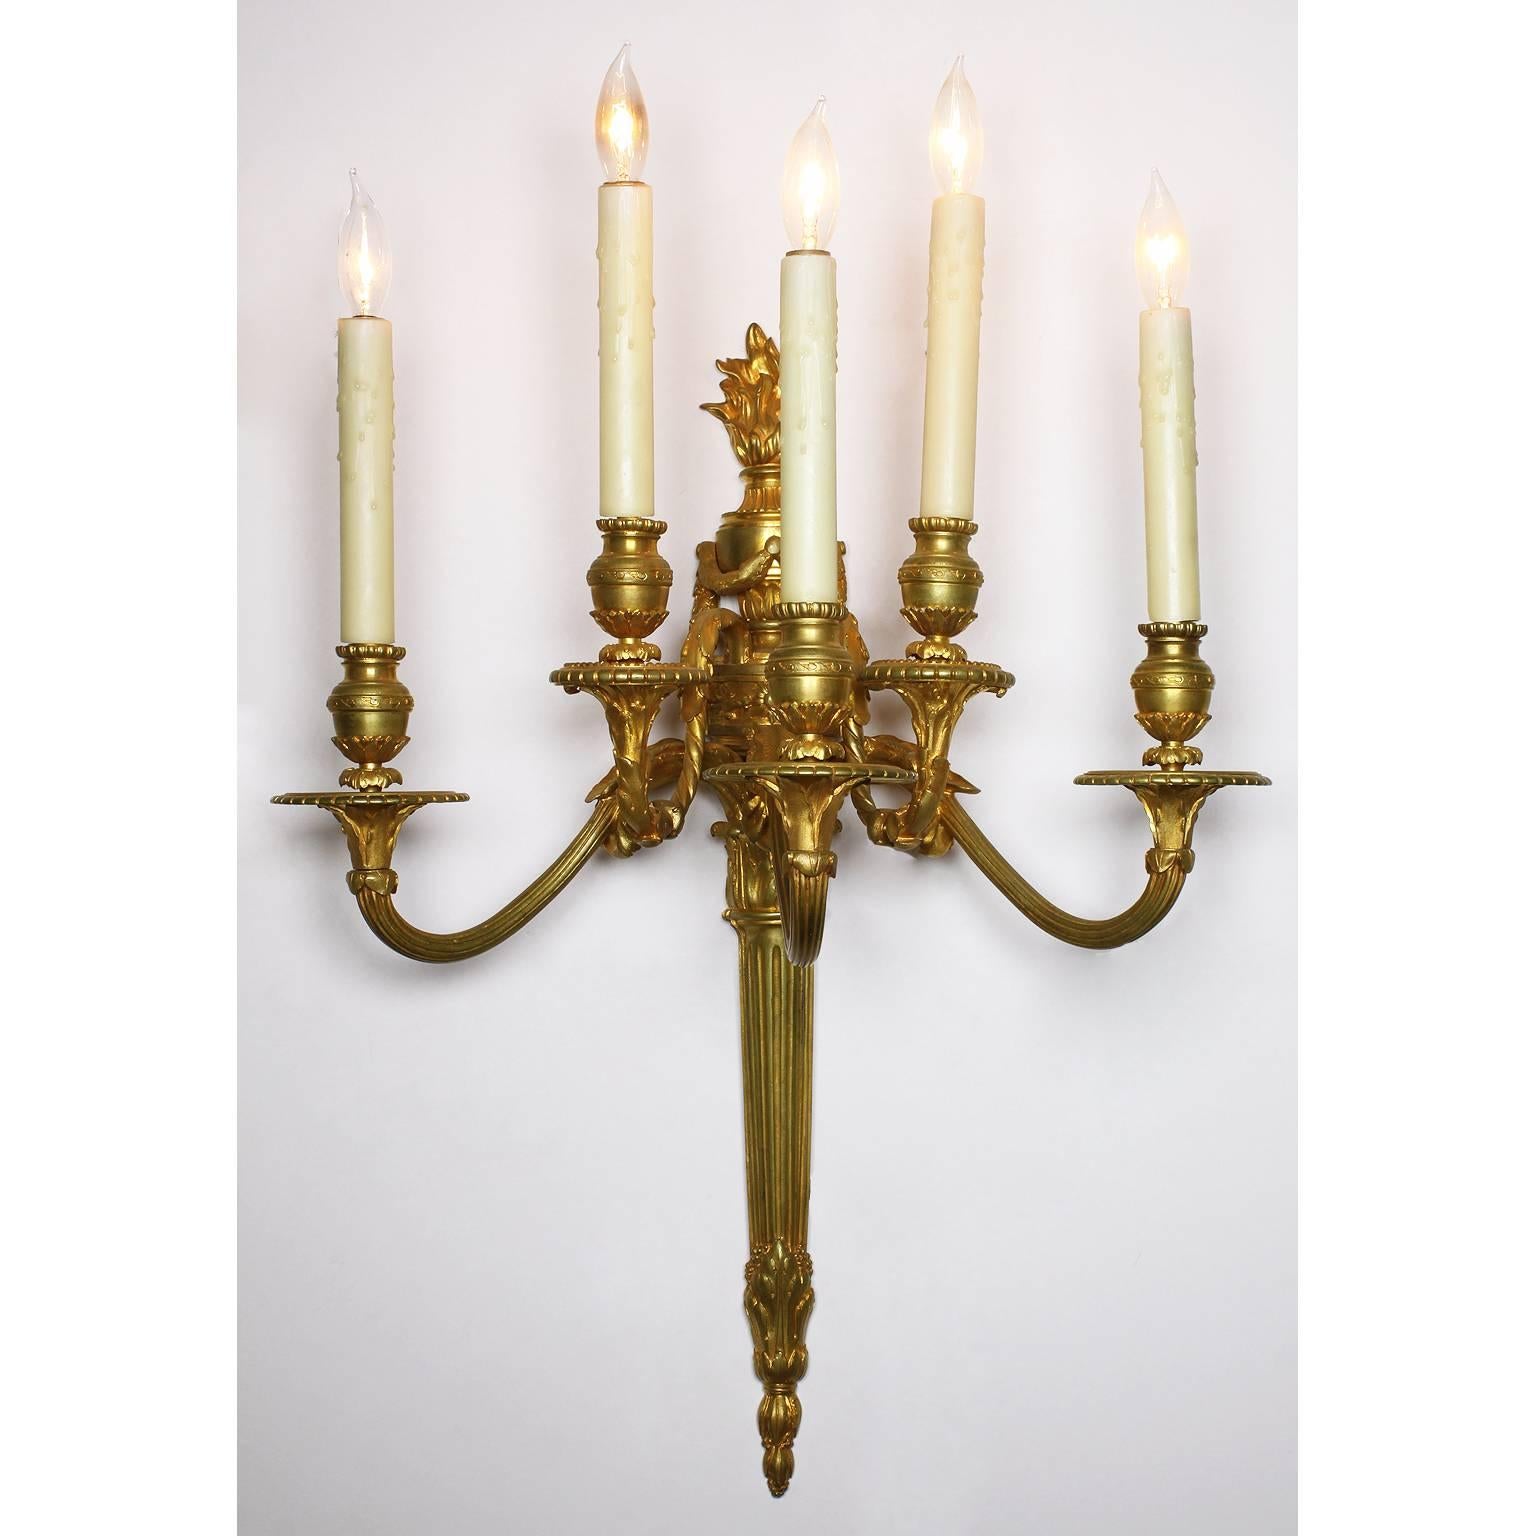 A fine pair of French 19th century Louis XVI style gilt bronze five-light wall sconces. Each lumière with scrolled arms and crowned with a neoclassical urn surmounted with wreaths and topped with a burning flame. Stamped with the bronzier's initials